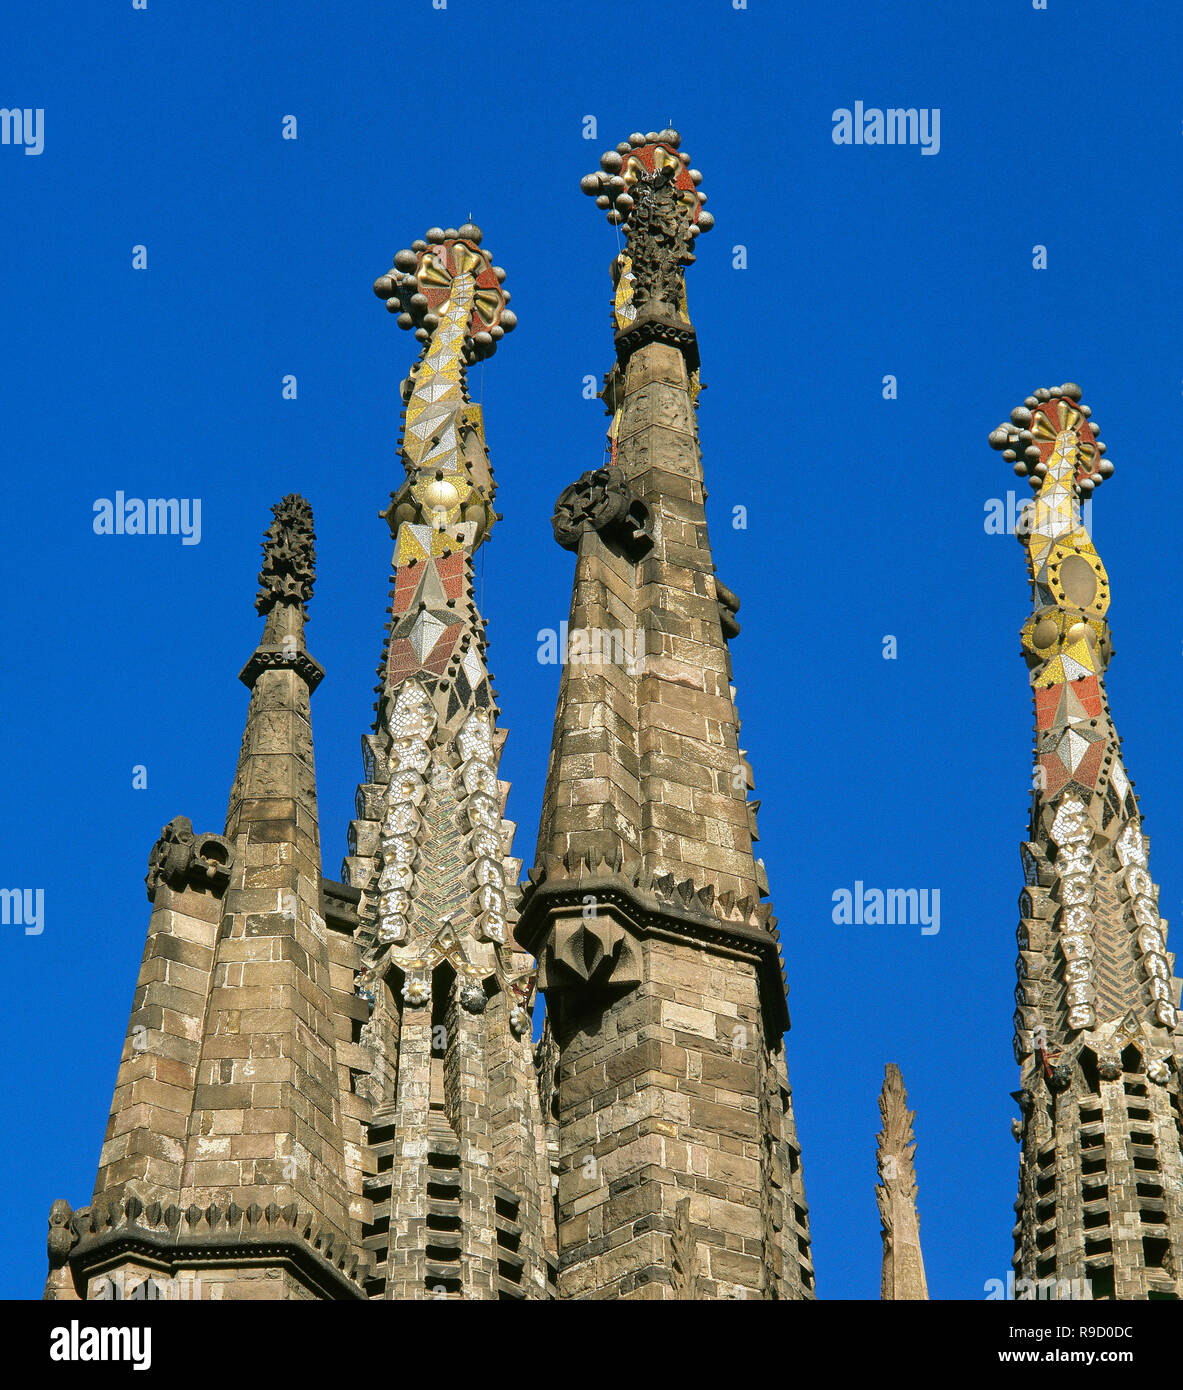 Spain, Catalonia, Barcelona. Basilica of The Sagrada Familia, by Antonio Gaudi (1852-1926). Pinnacles of the towers of the apostles, decorated with technique of 'Trencadis', broken tiles mosaics. Architectural detail. Catalan Modernism style. Unesco World Heritage Site Stock Photo